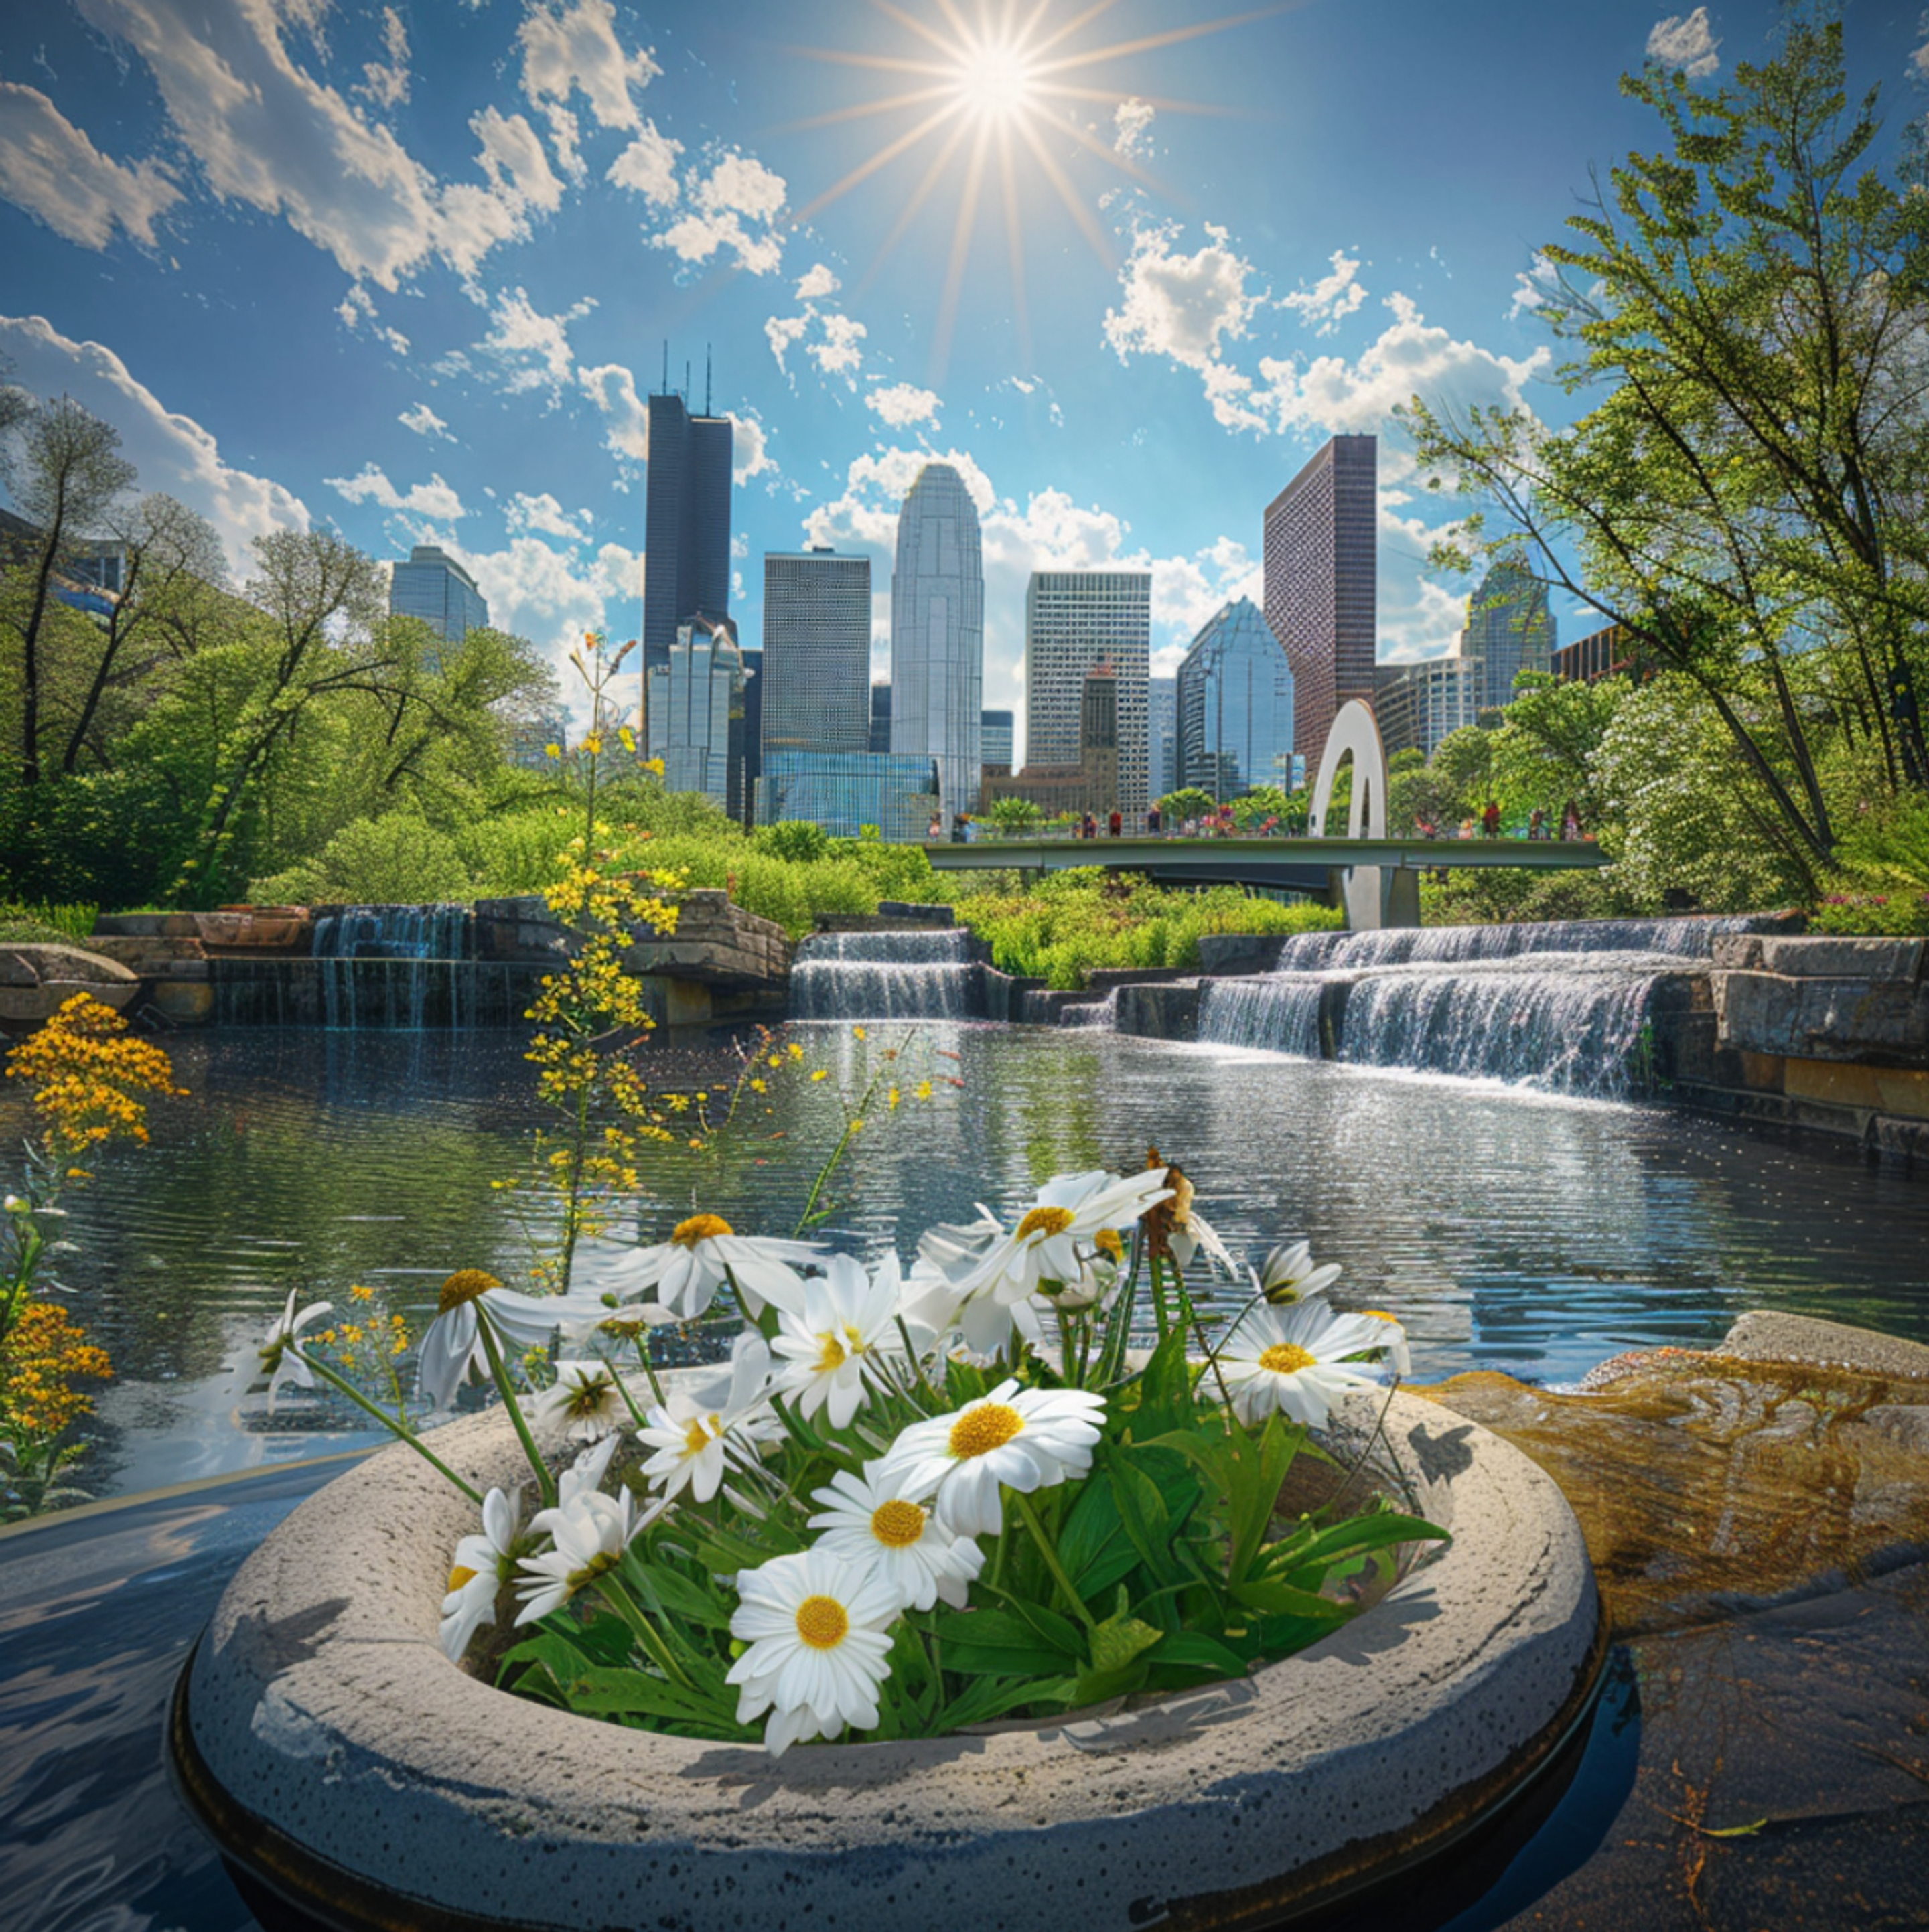 Bright sunny day at a park in Minneapolis with a foreground of daisies and lush greenery, cascading waterfalls, and the city's gleaming skyline in the background, reflecting the harmonious blend of nature and urban landscape in the city.